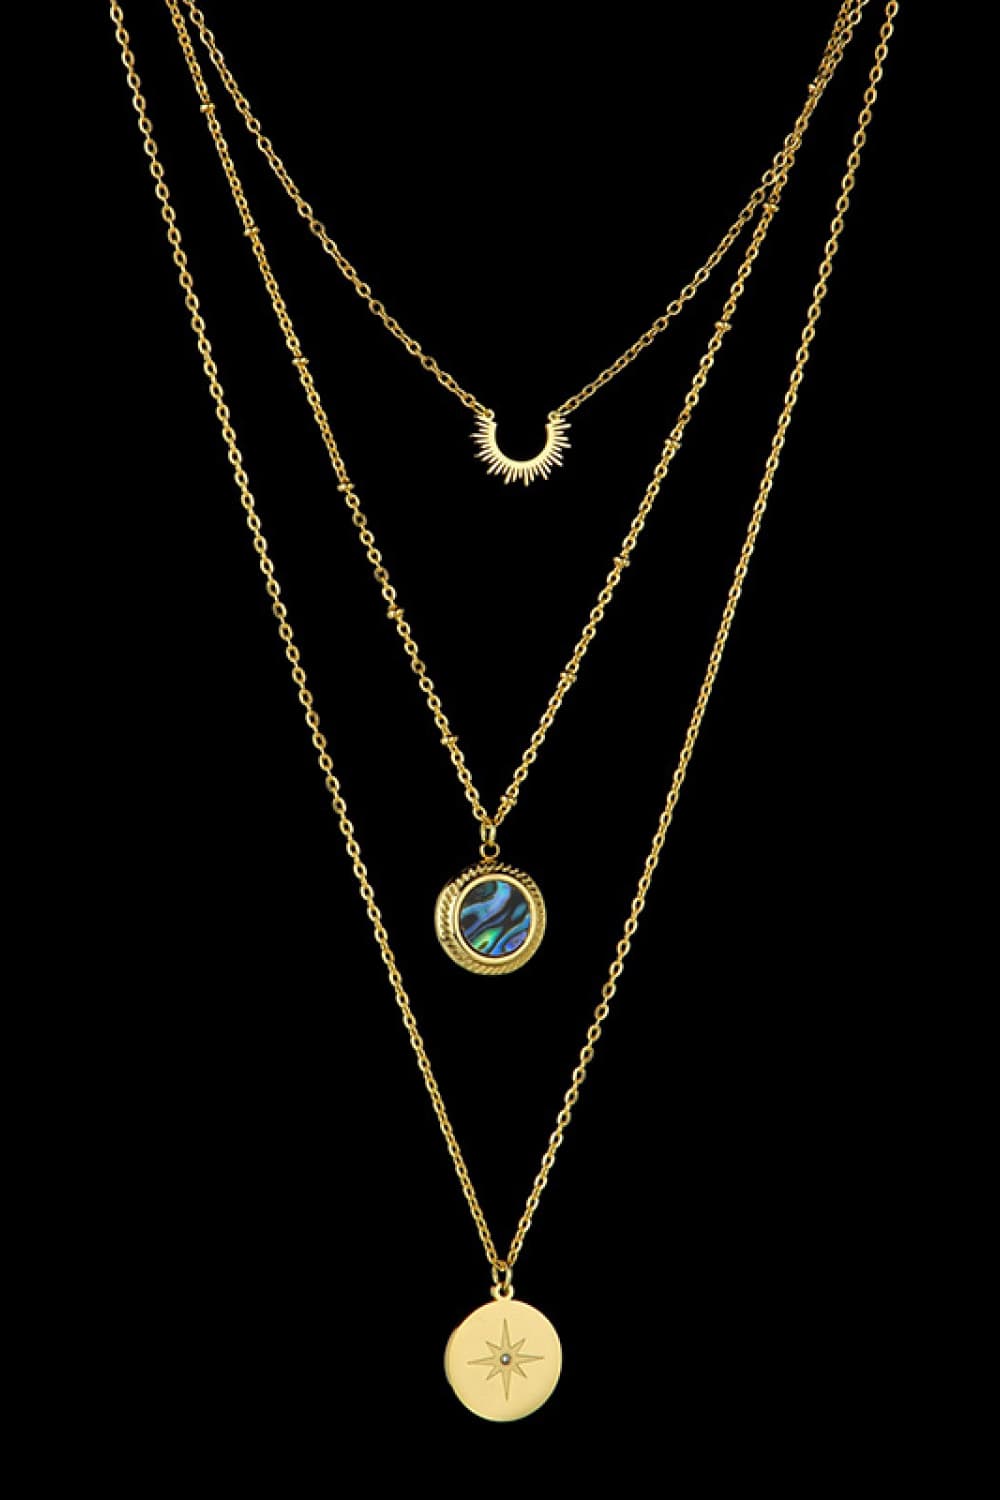 Stainless Steel Triple-Layered Modern Sun, Moon and Star Necklace